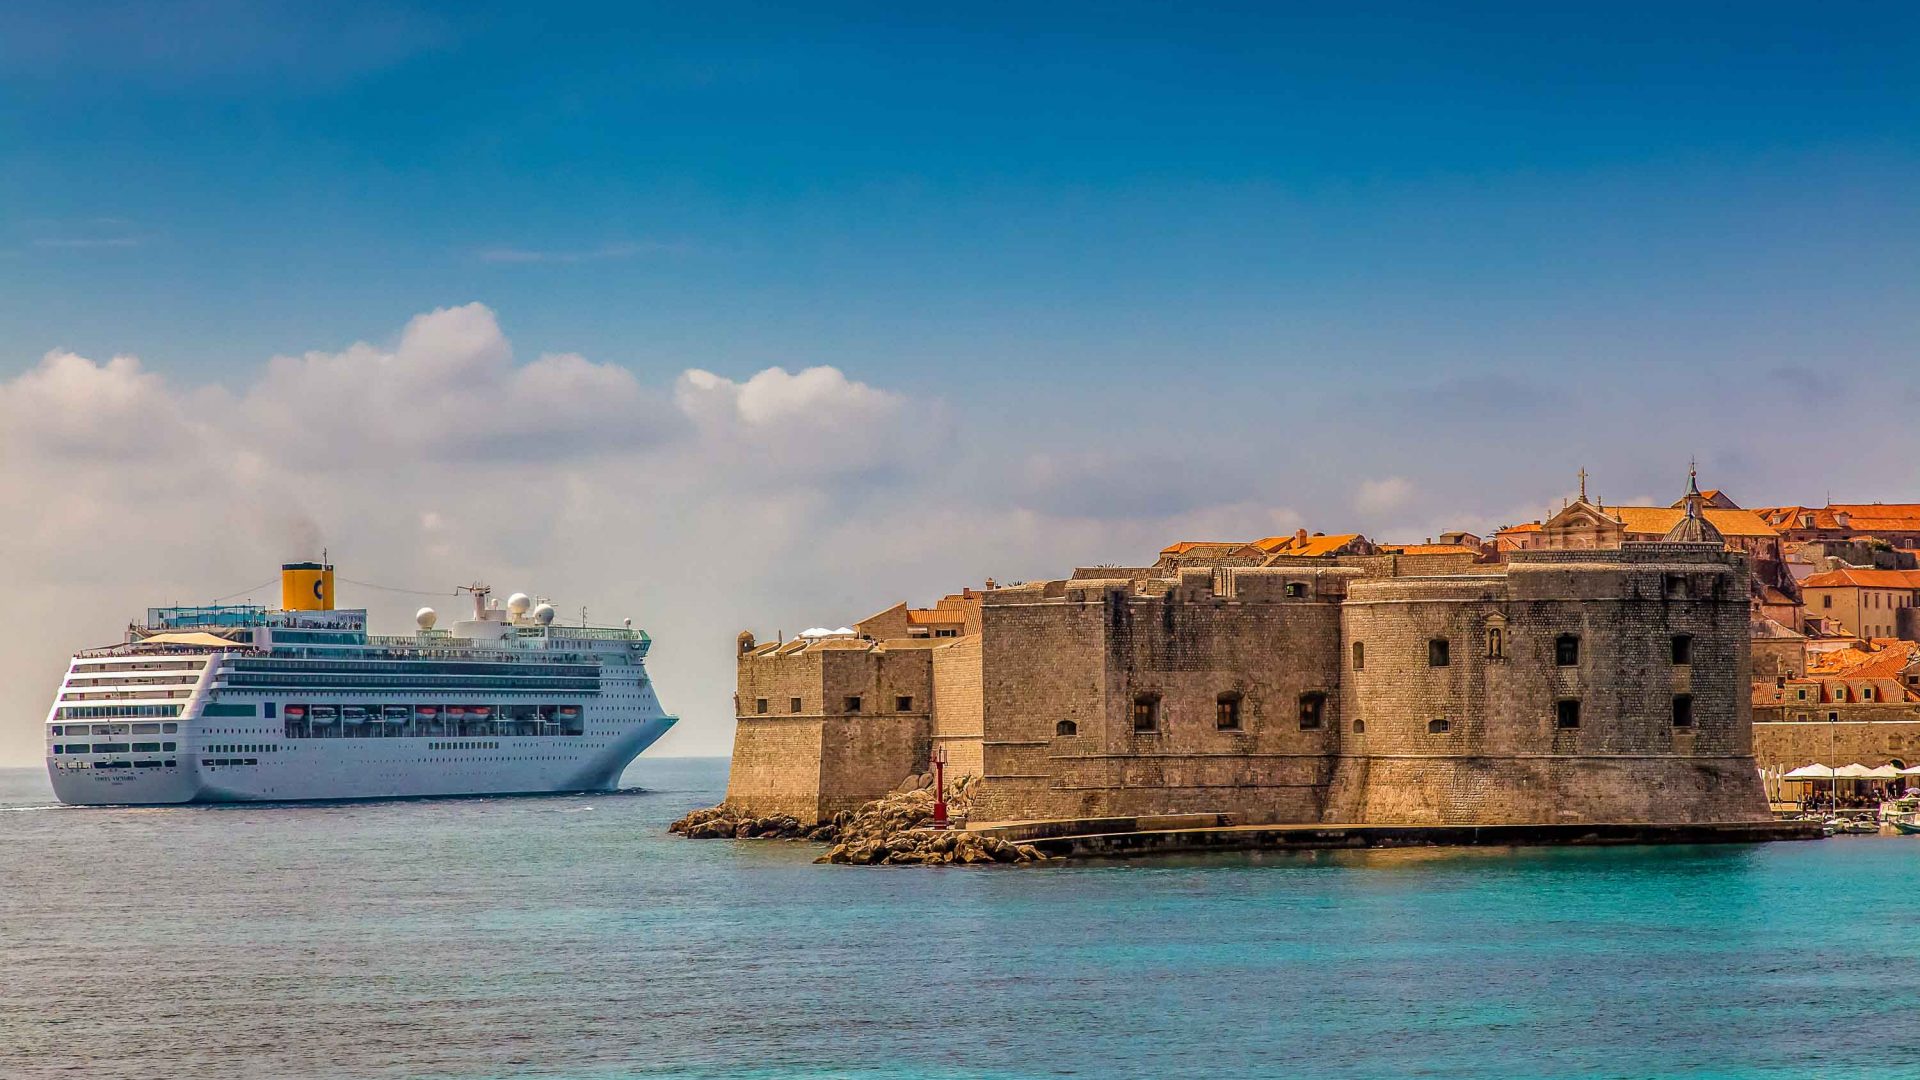 A cruise ship passes the stone walls of Dubrovnik.